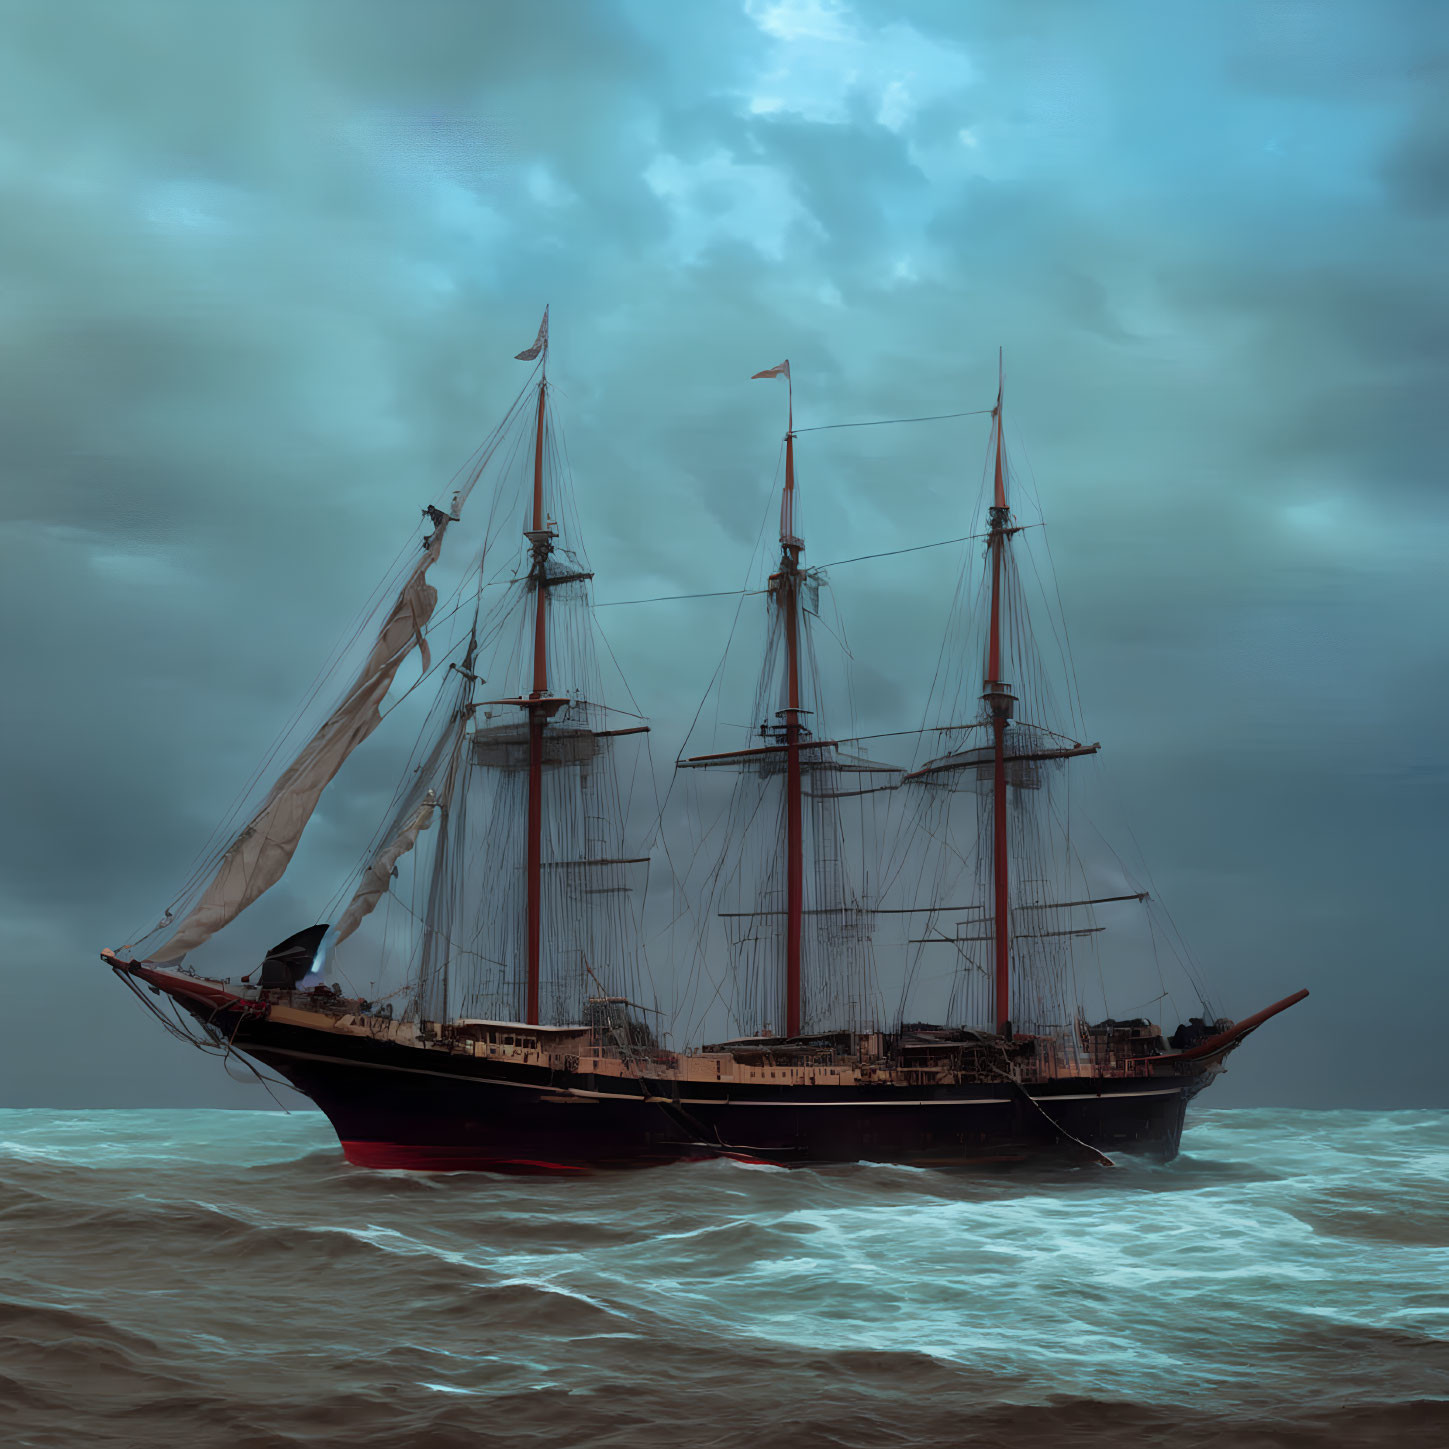 Tall ship with billowing sails on turbulent sea under moody sky